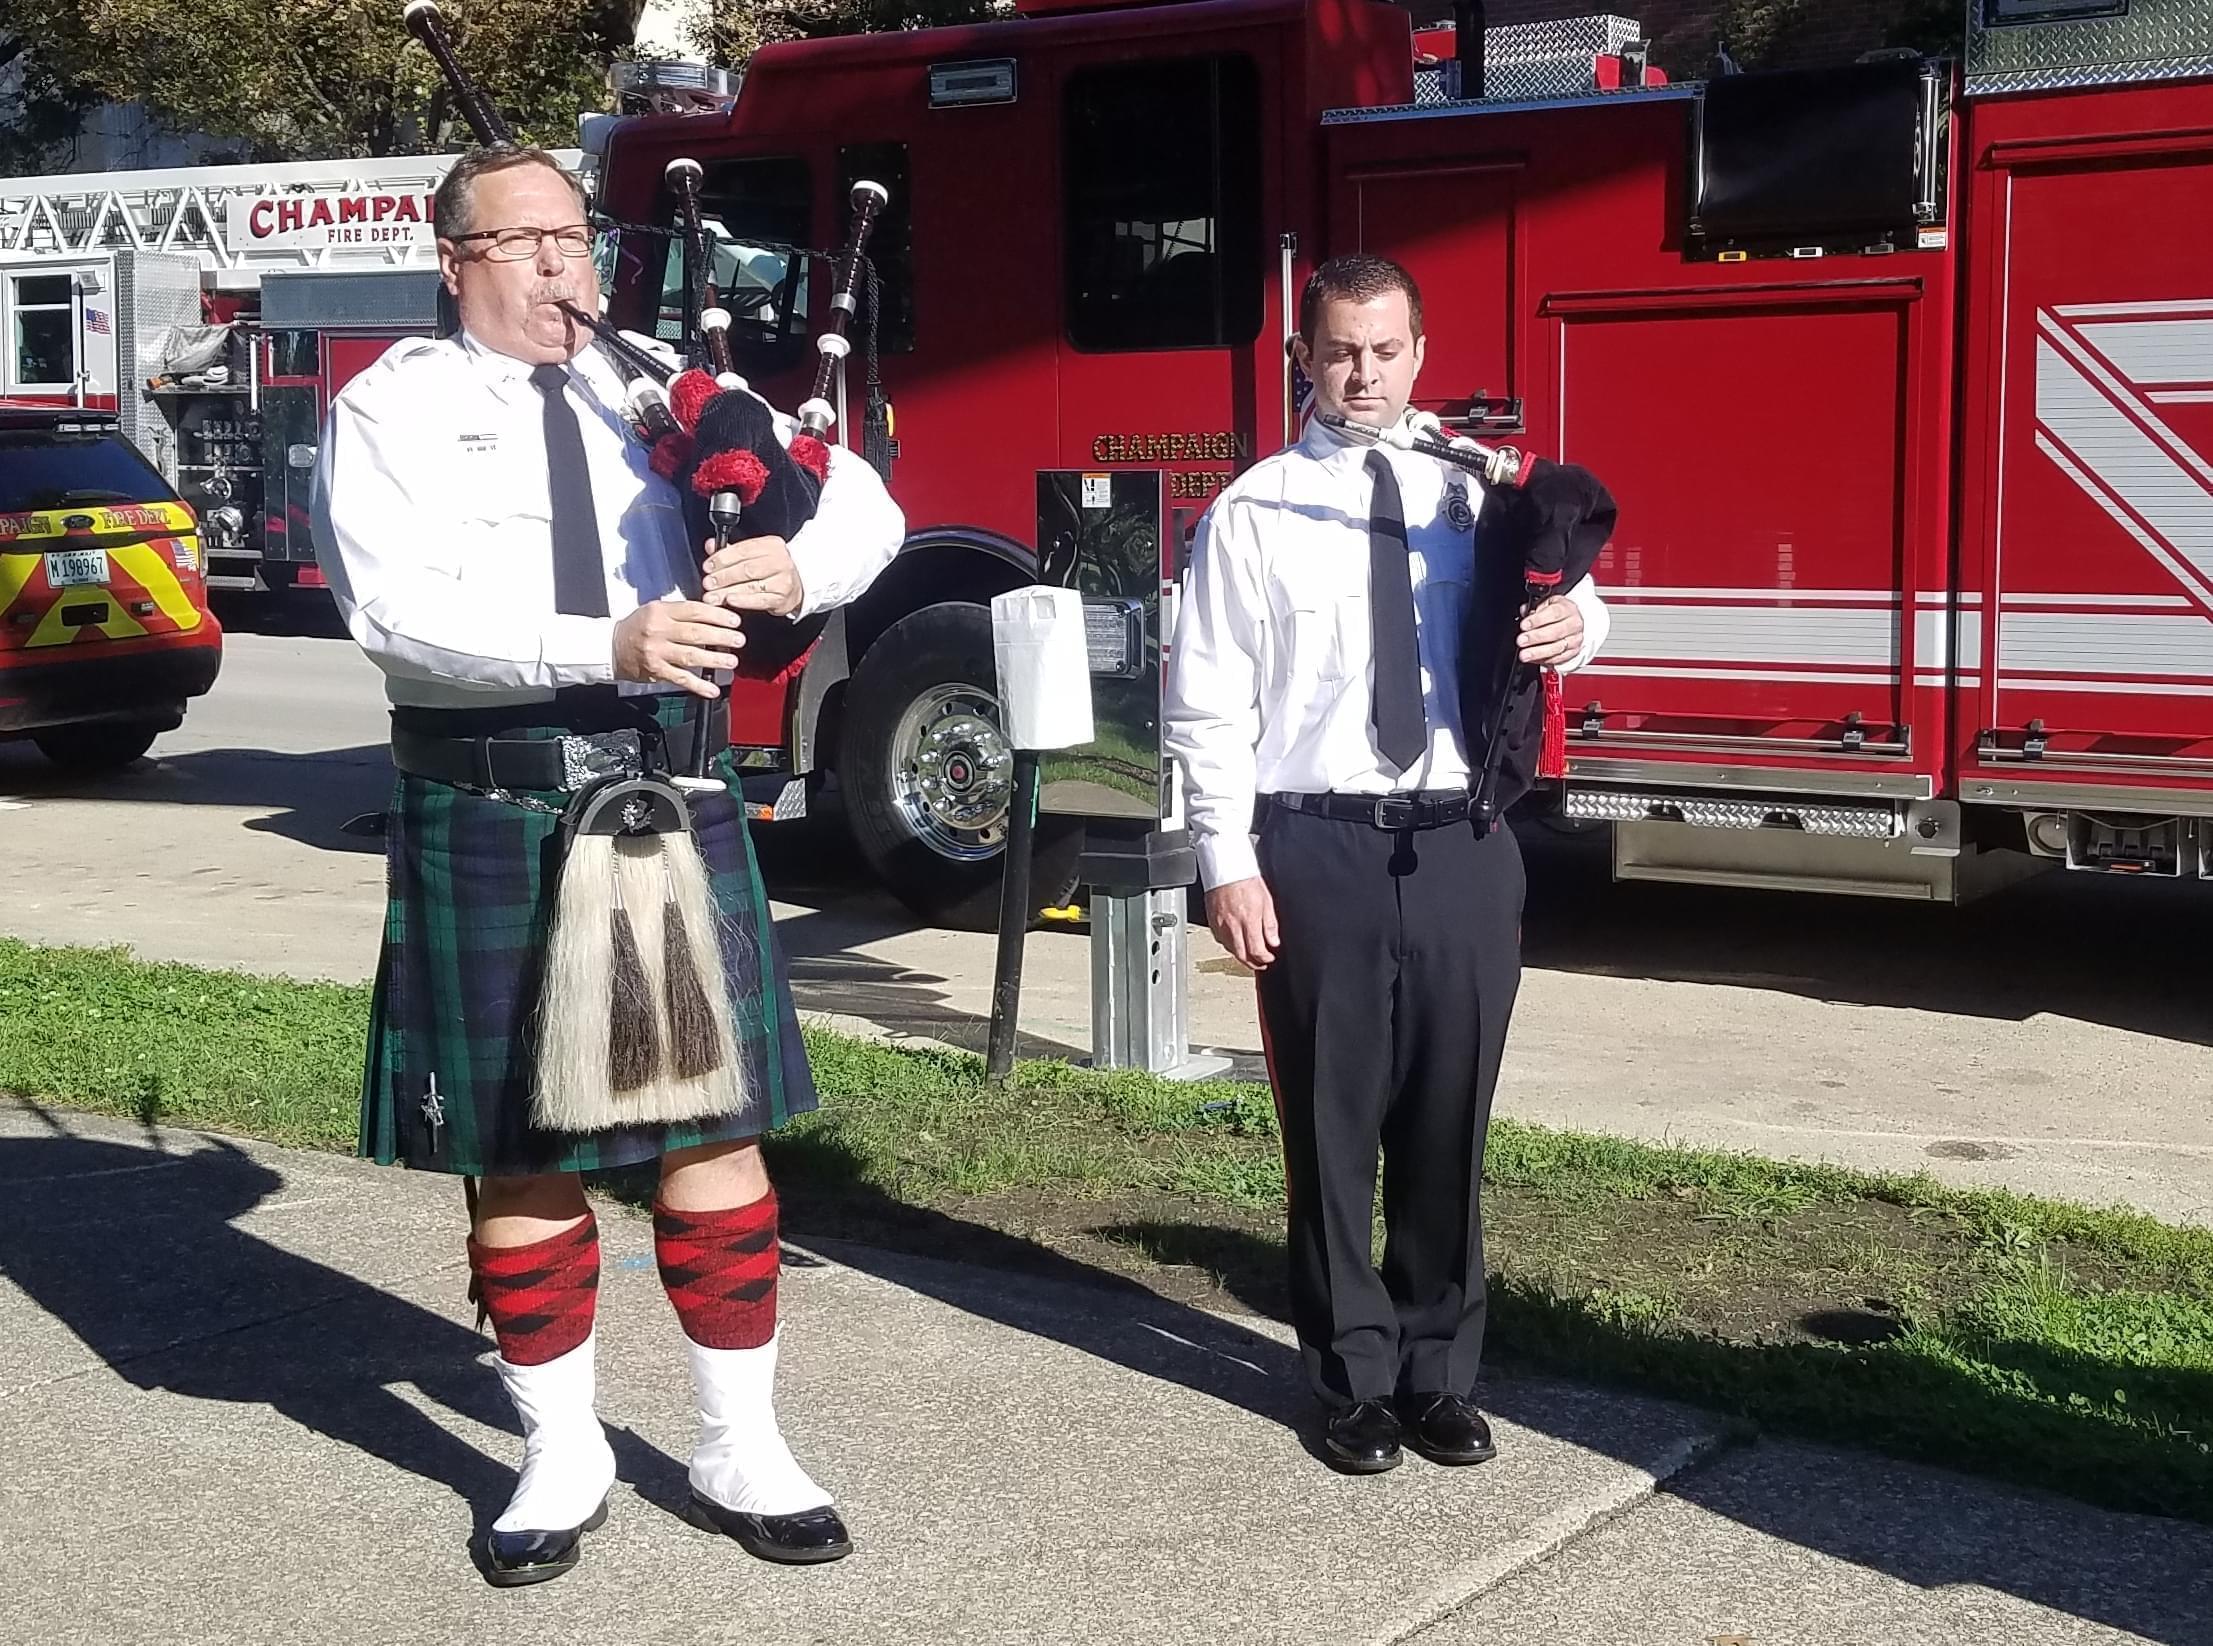 Champaign Fire Department bagpipers, Capt. Todd Hitt and Firefighter Zach Tish.